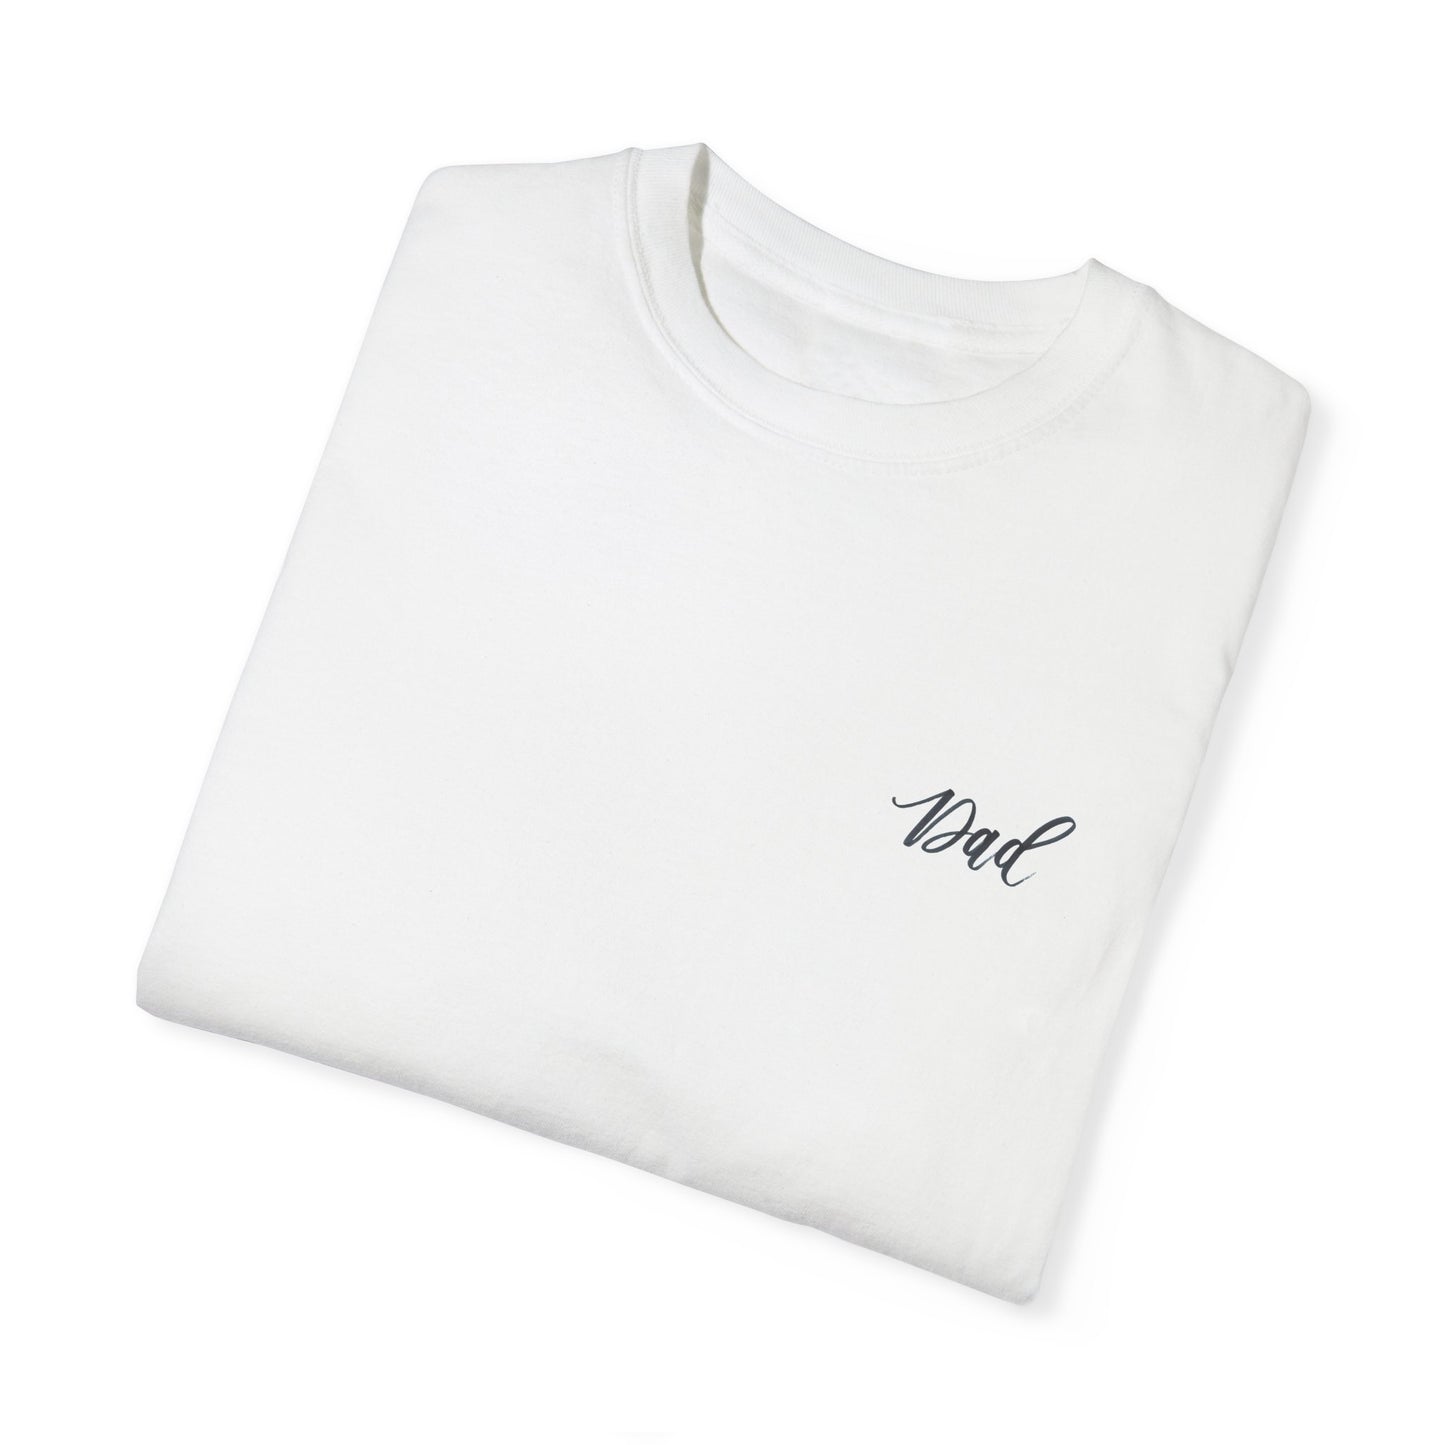 Script "Dad" Front & "Raising Tiny Hearts with Love" Calligraphy Back - Unisex High Quality 100% Cotton T-shirt - Mom & Dad Shirts #02